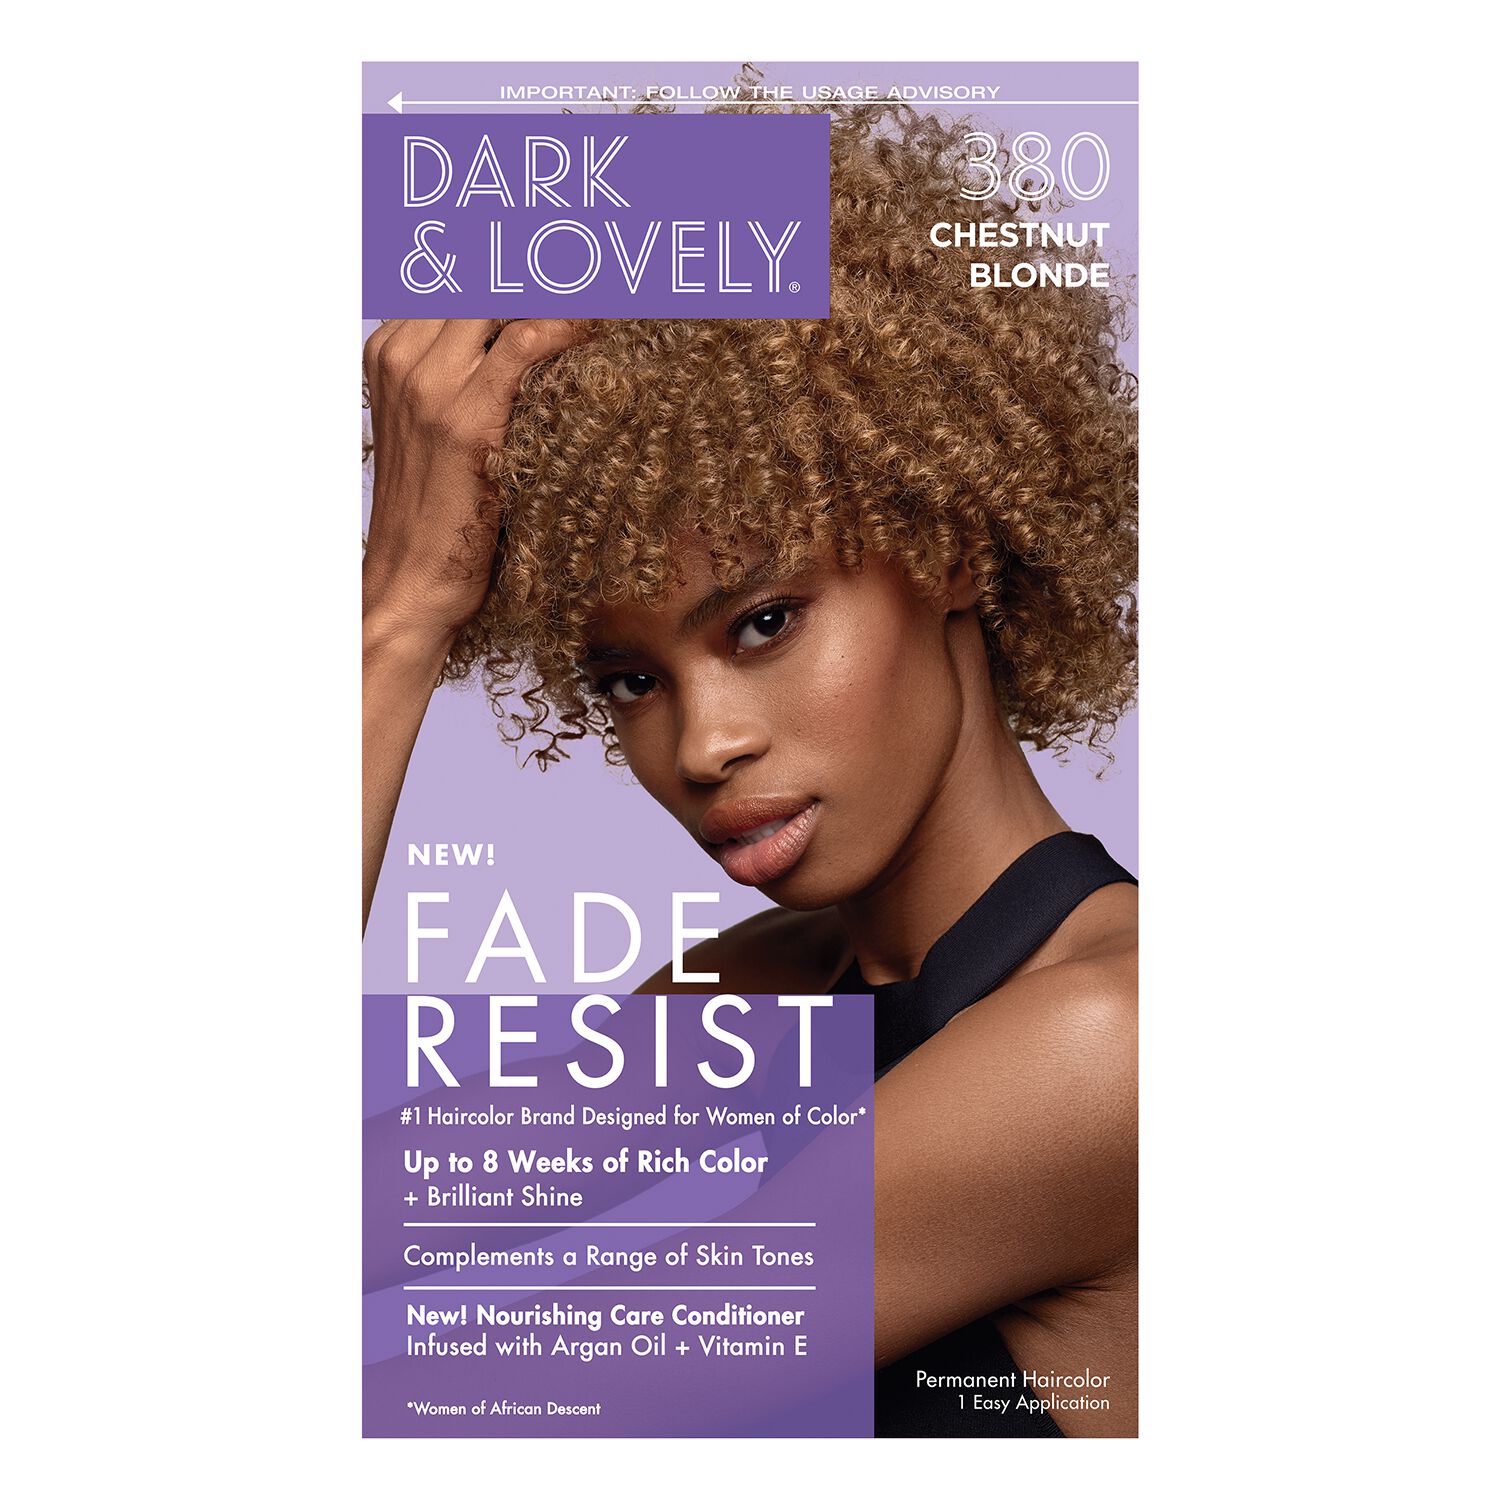 Fade Resistant Chestnut Blonde Permanent Hair Color by Dark & Lovely ...